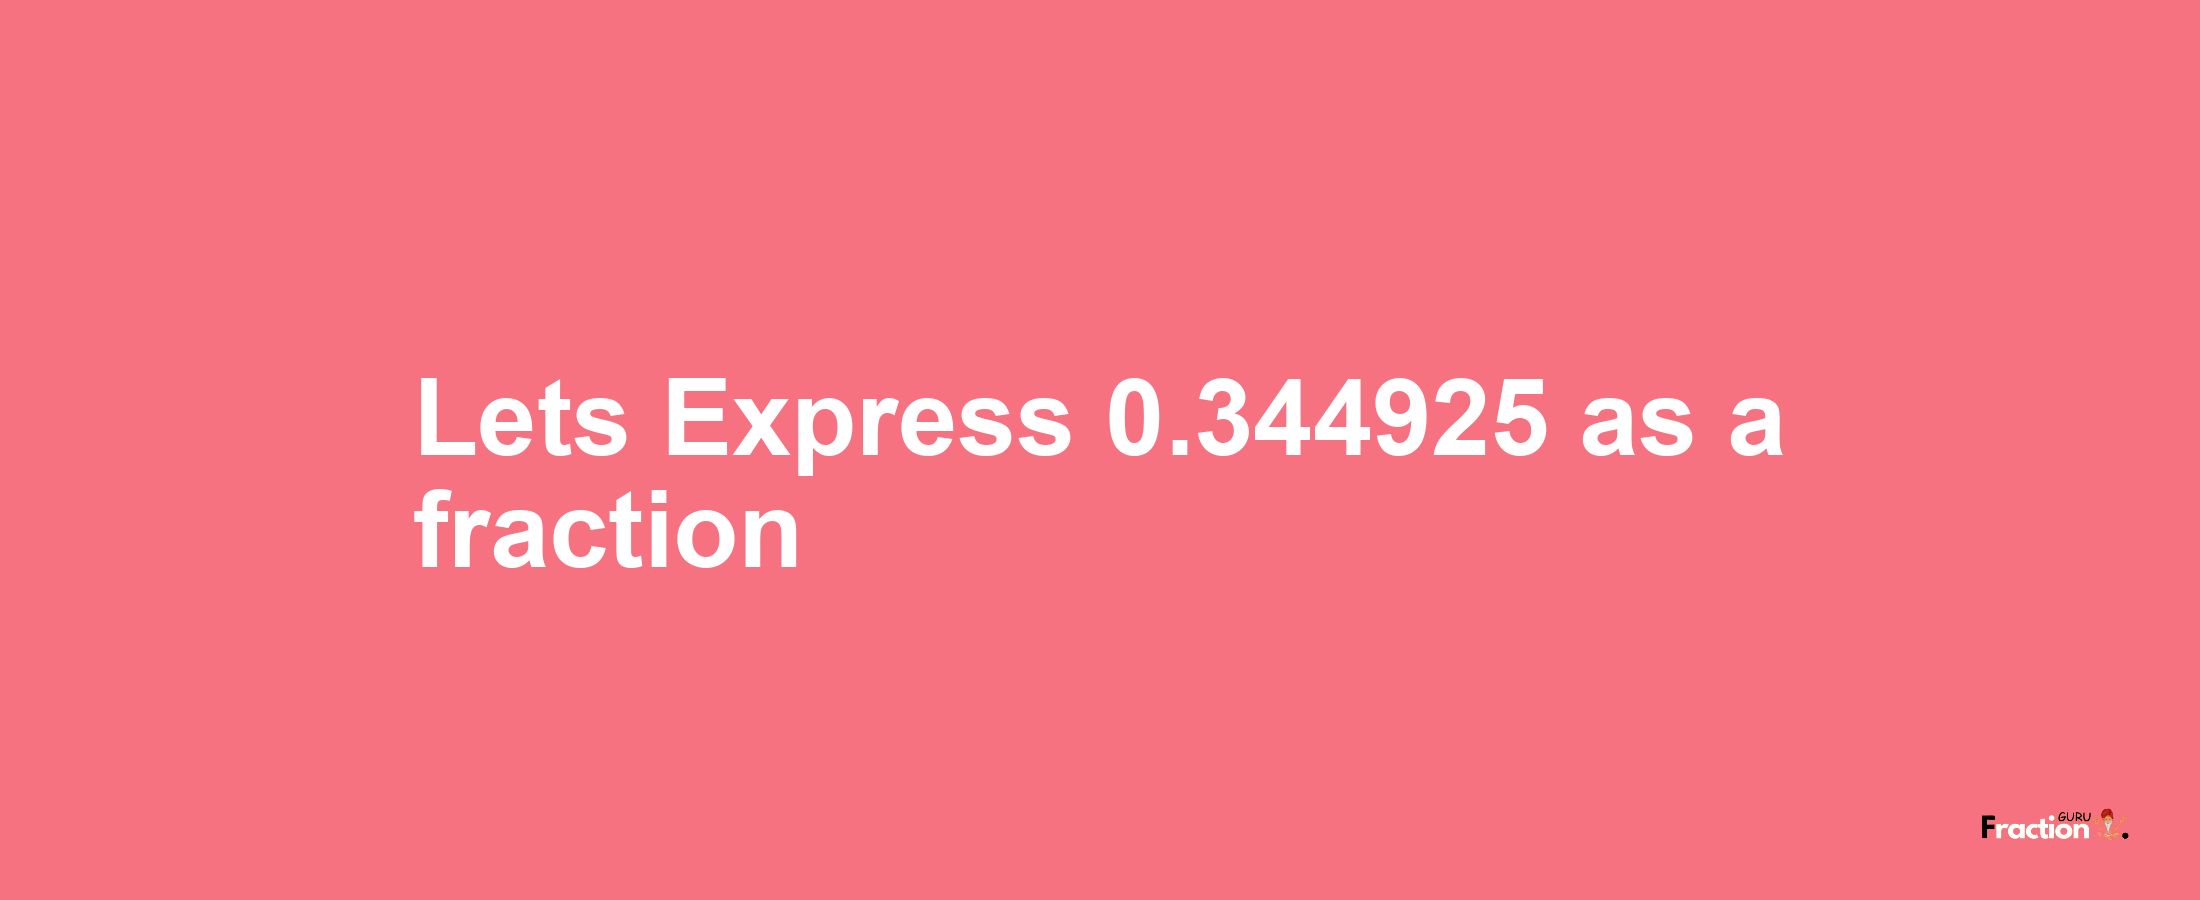 Lets Express 0.344925 as afraction